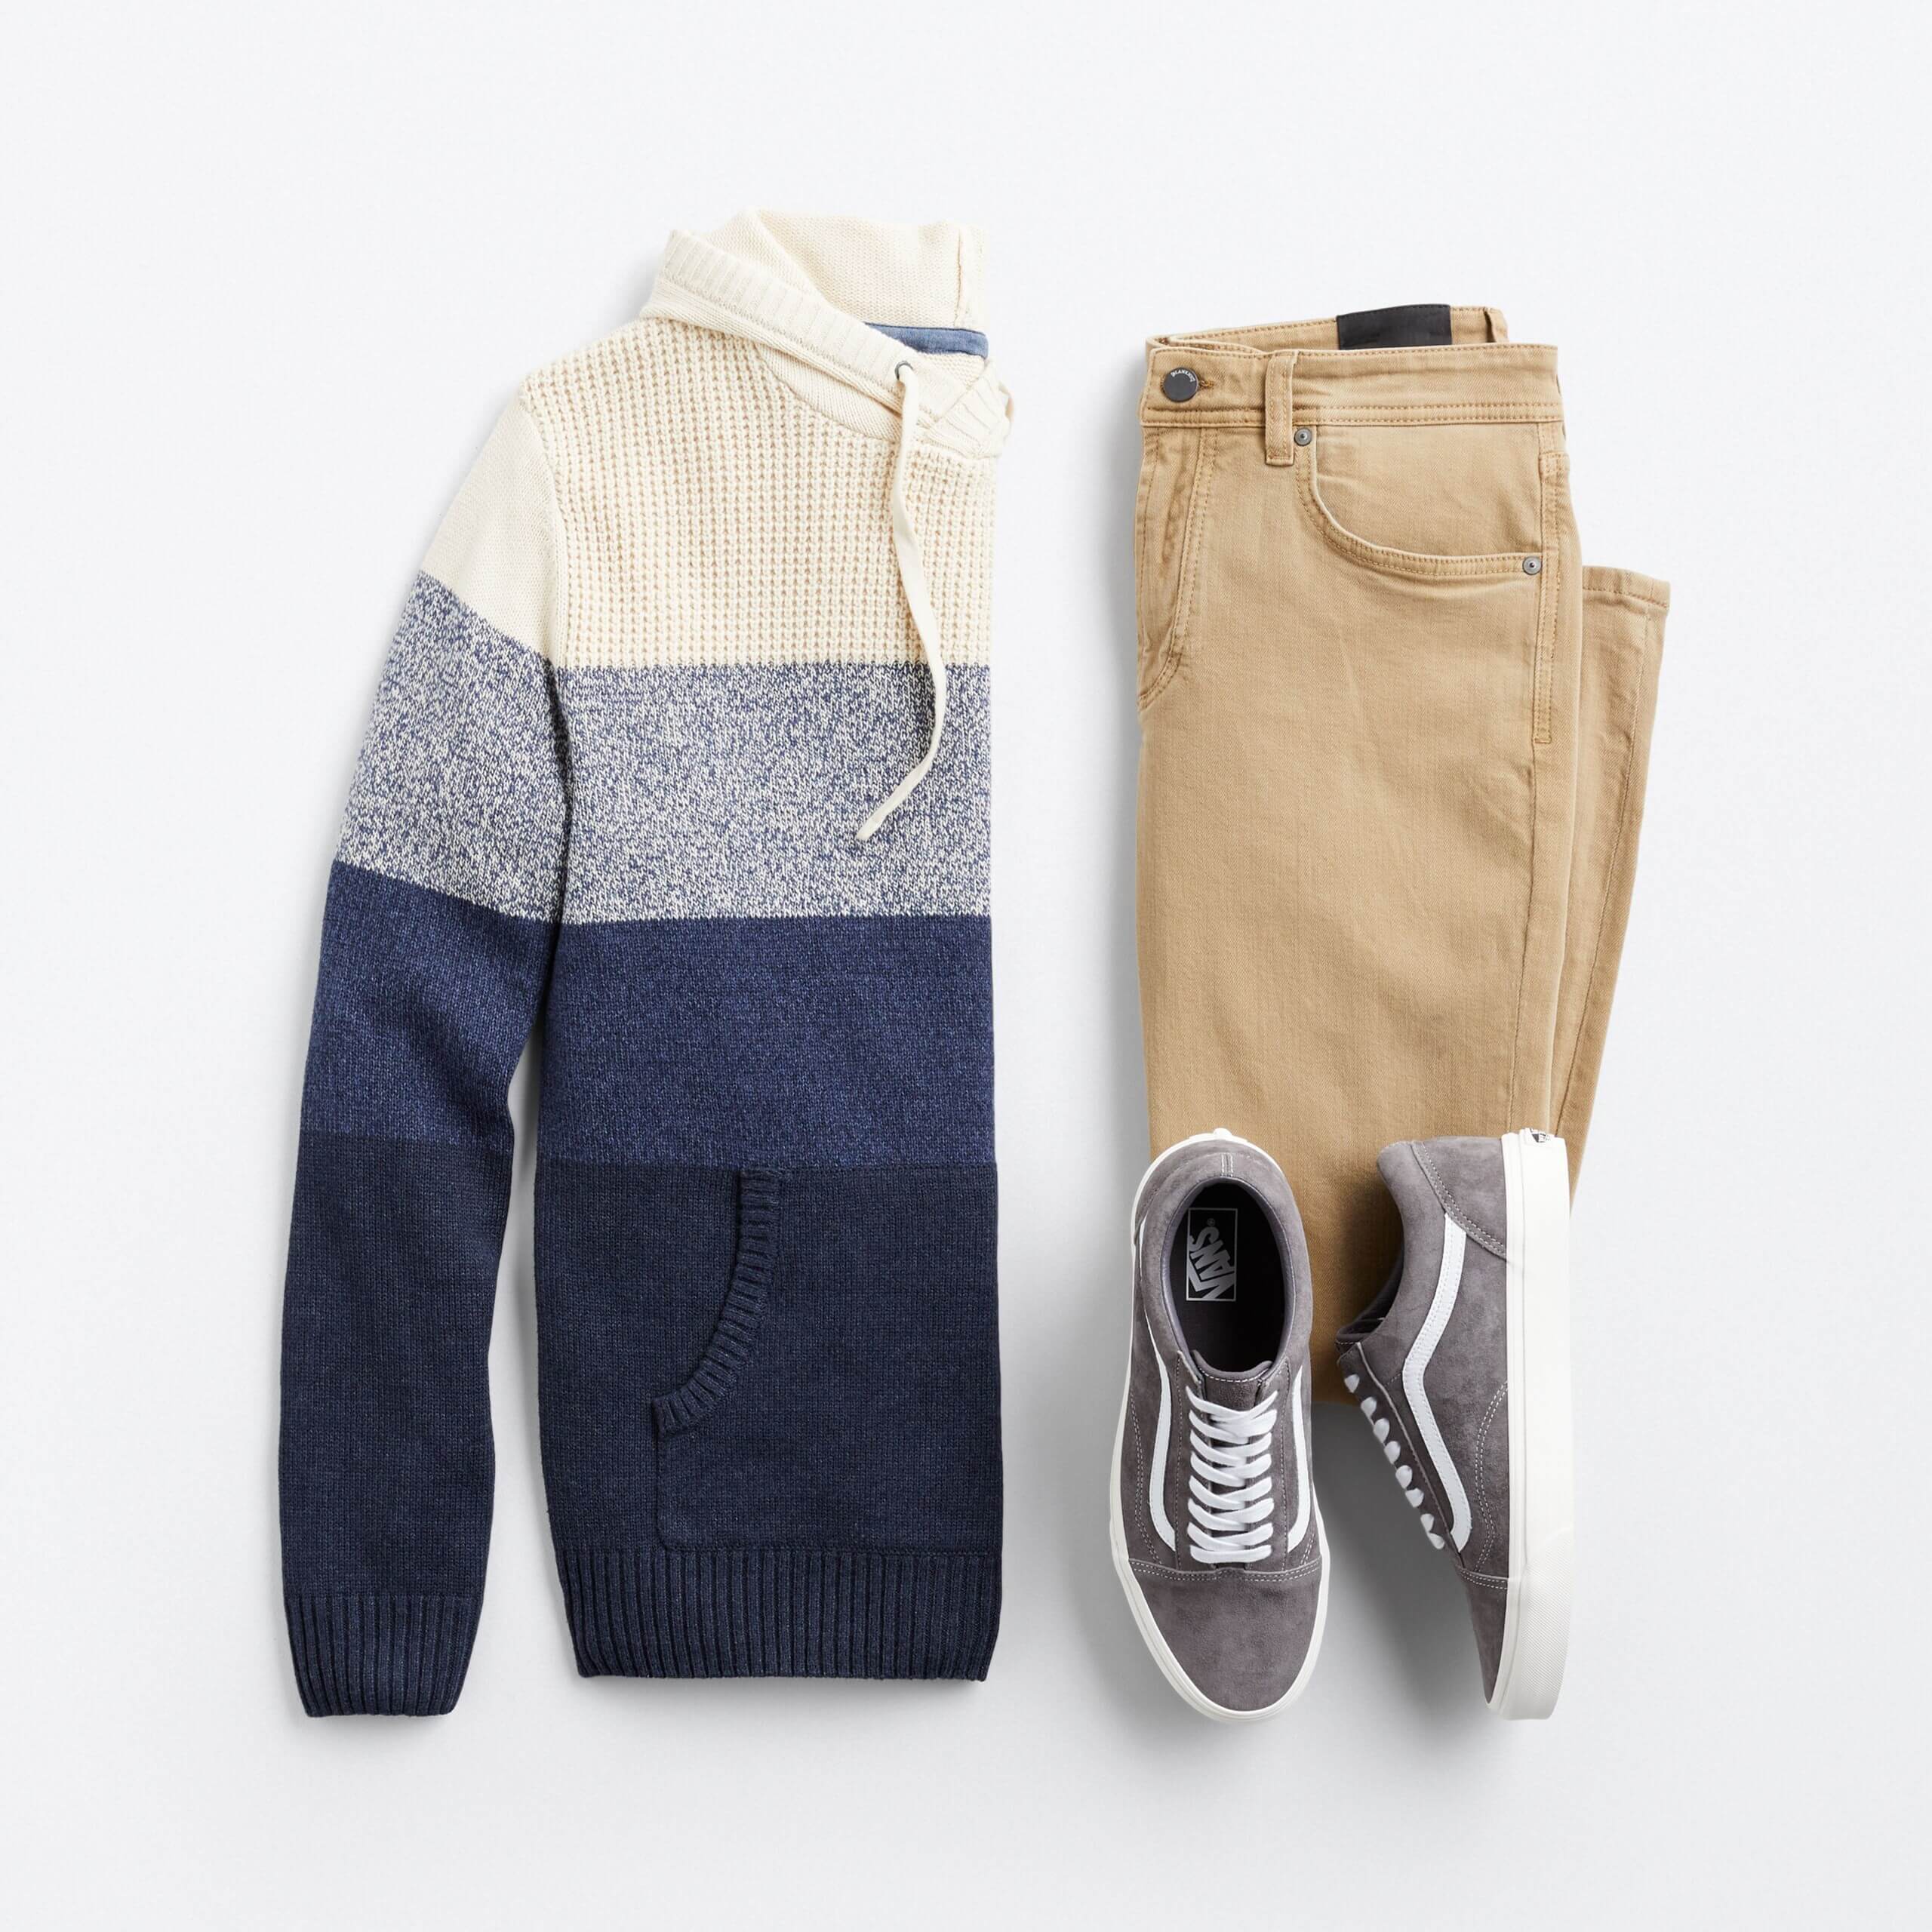 Stitch Fix men's outfit laydown featuring khaki jeans, grey sneakers and cream and navy blue striped hoodie.